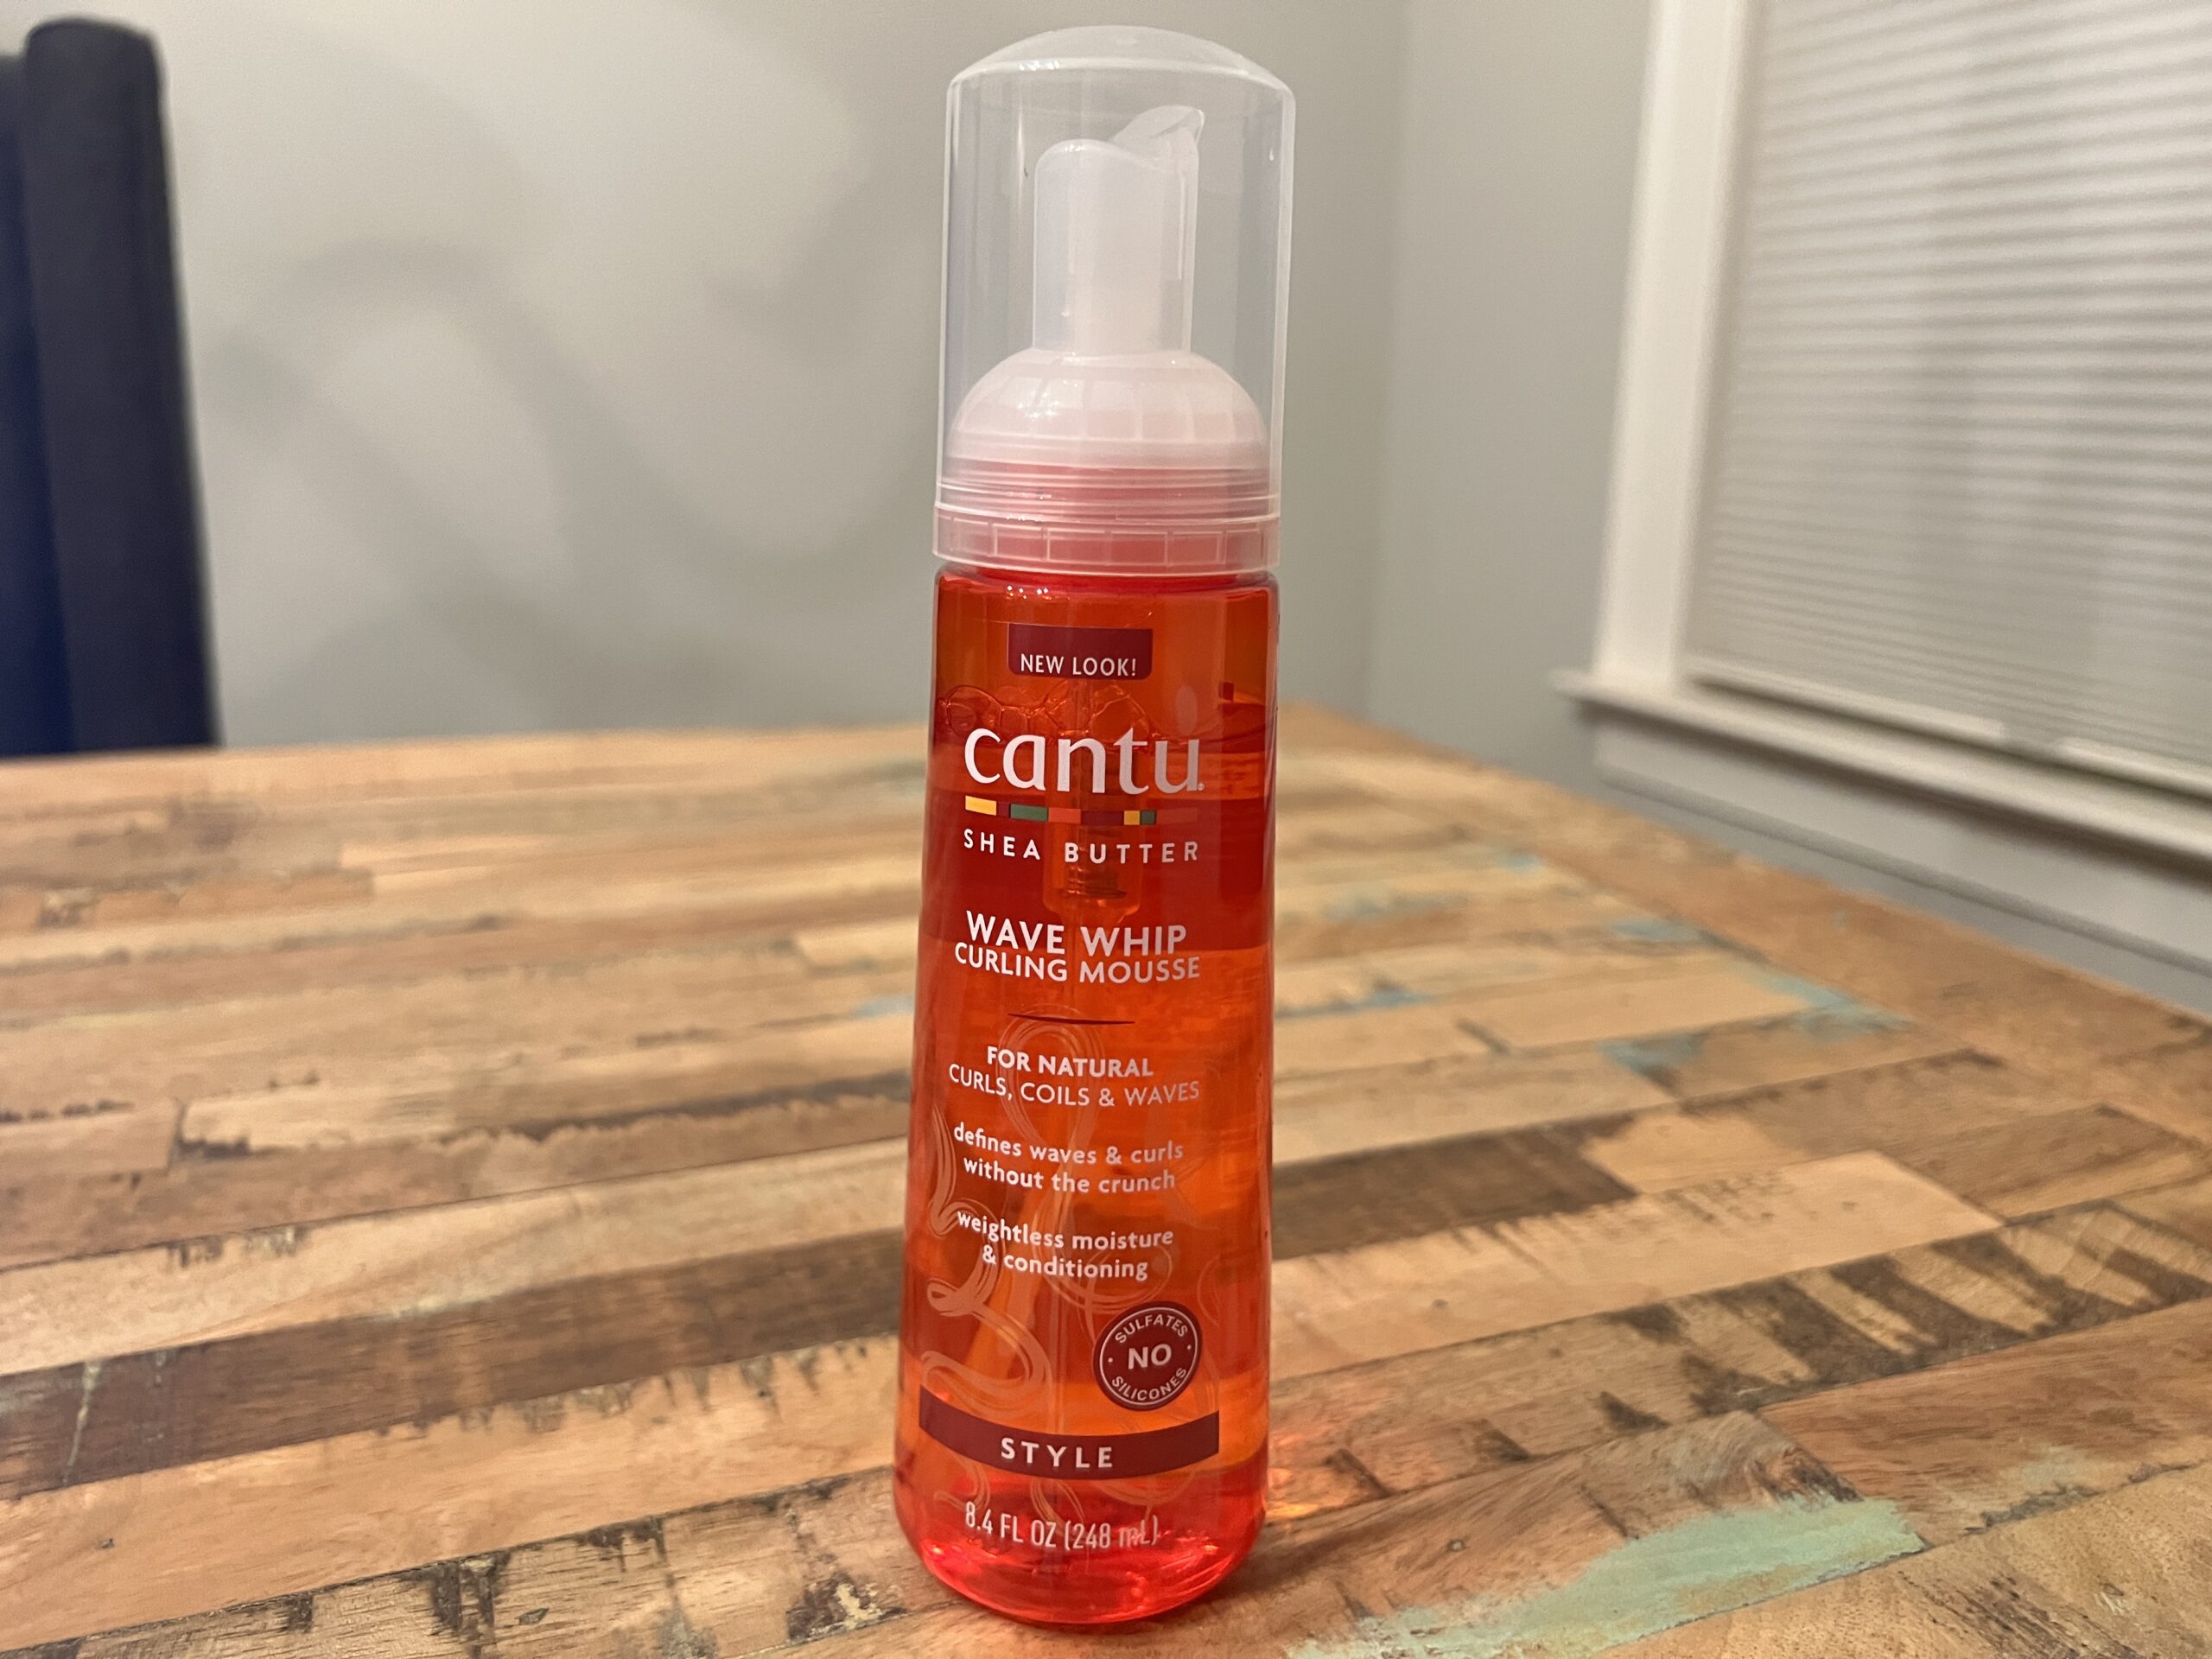 Cantu Shea Butter Wave Whip Curling Mousse can, formulated to define and enhance natural curl patterns.